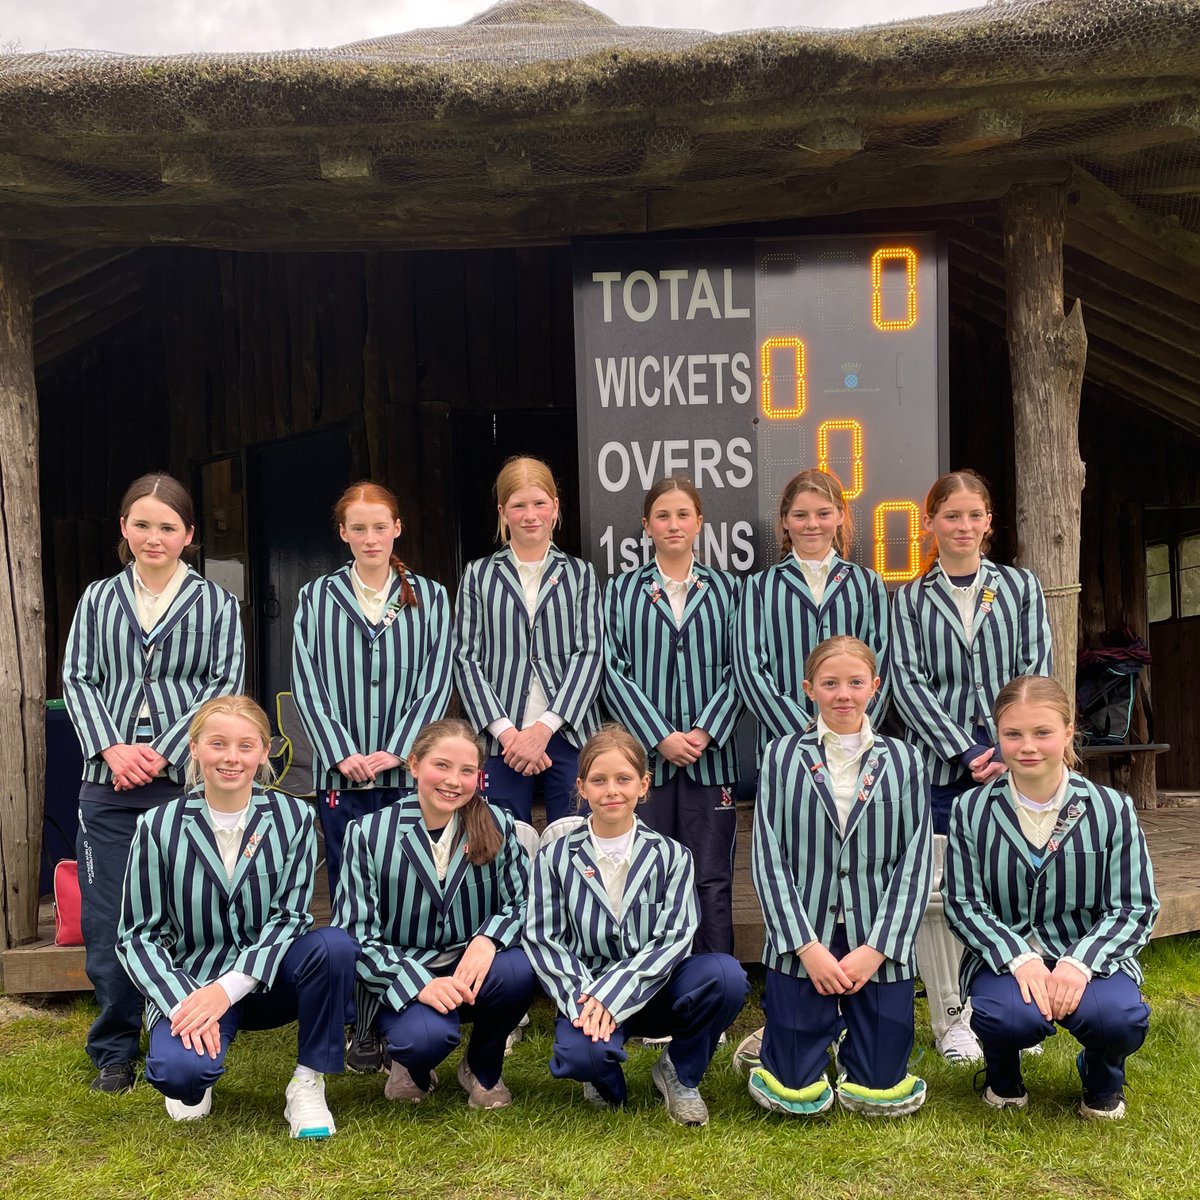 Good luck to our 1st XI Girls who are playing our friends @barnardiston in the Suffolk County Cup Cricket Qualifier this afternoon! 🏏 @suffolkcricket #oldbuckenhamhallschool #prepschoolcricket #suffolkcricket #prepschool #suffolkprepschool #countycricketmatch #prayforsunshine